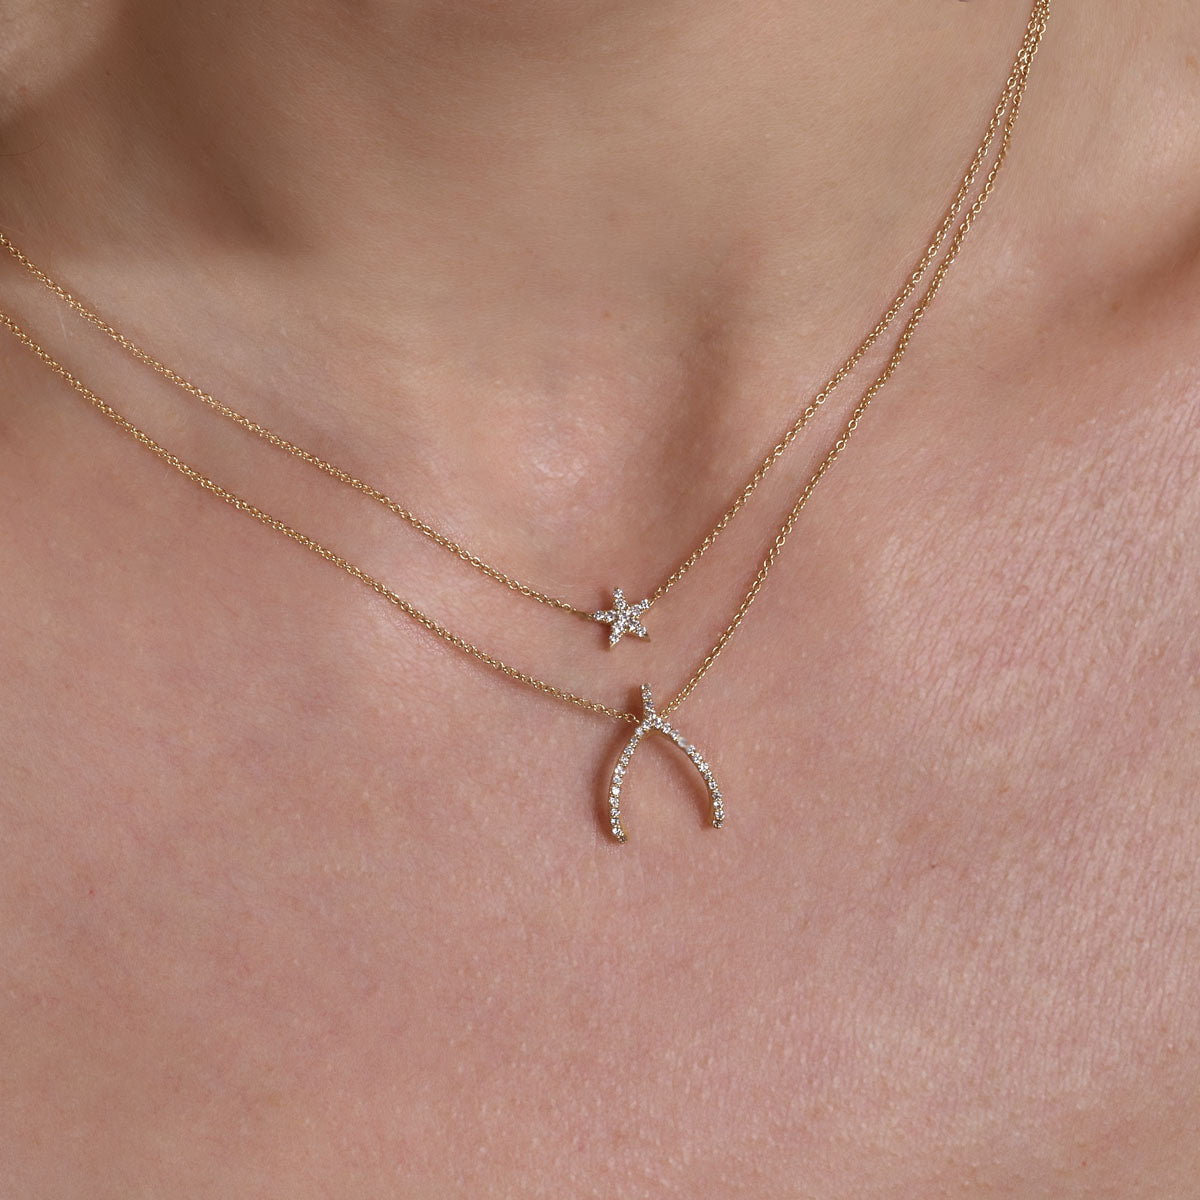 gold diamond star necklace and gold diamond wishbone necklace on neck_1c3fed5d 18bd 4cf5 8c95 944acb6630d2